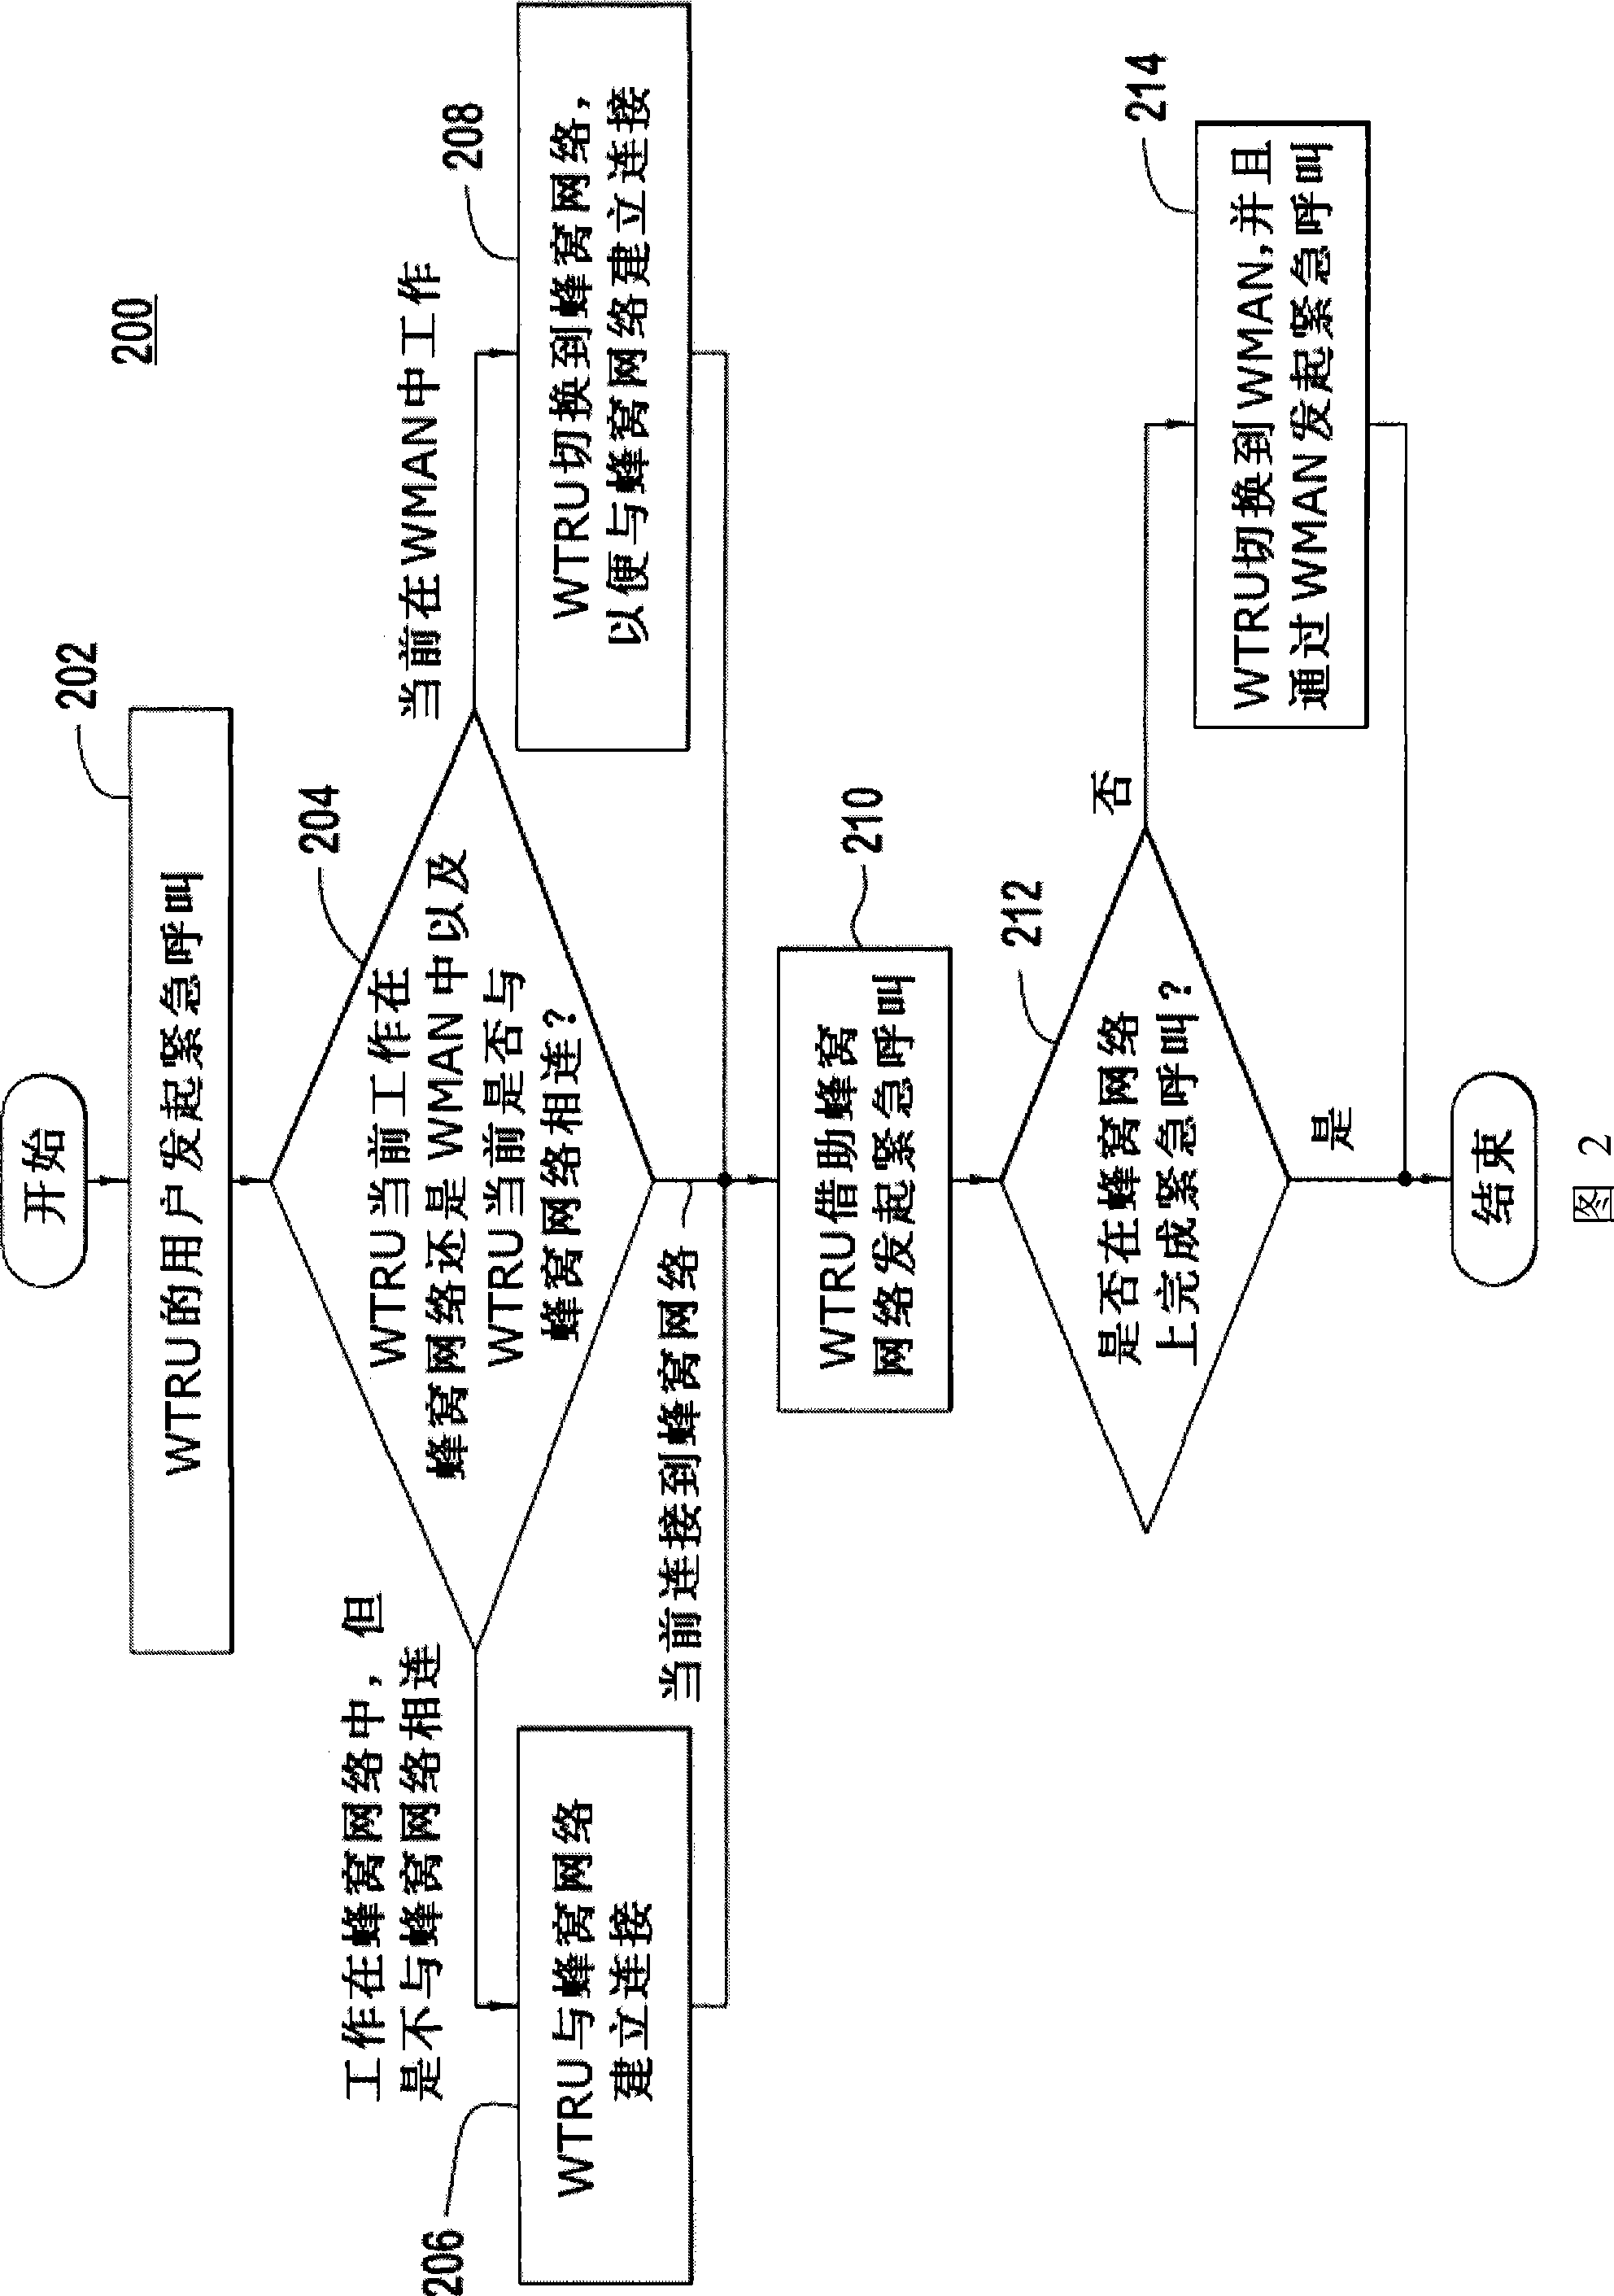 Method and apparatus for supporting an emergency call in a wireless metropolitan area network